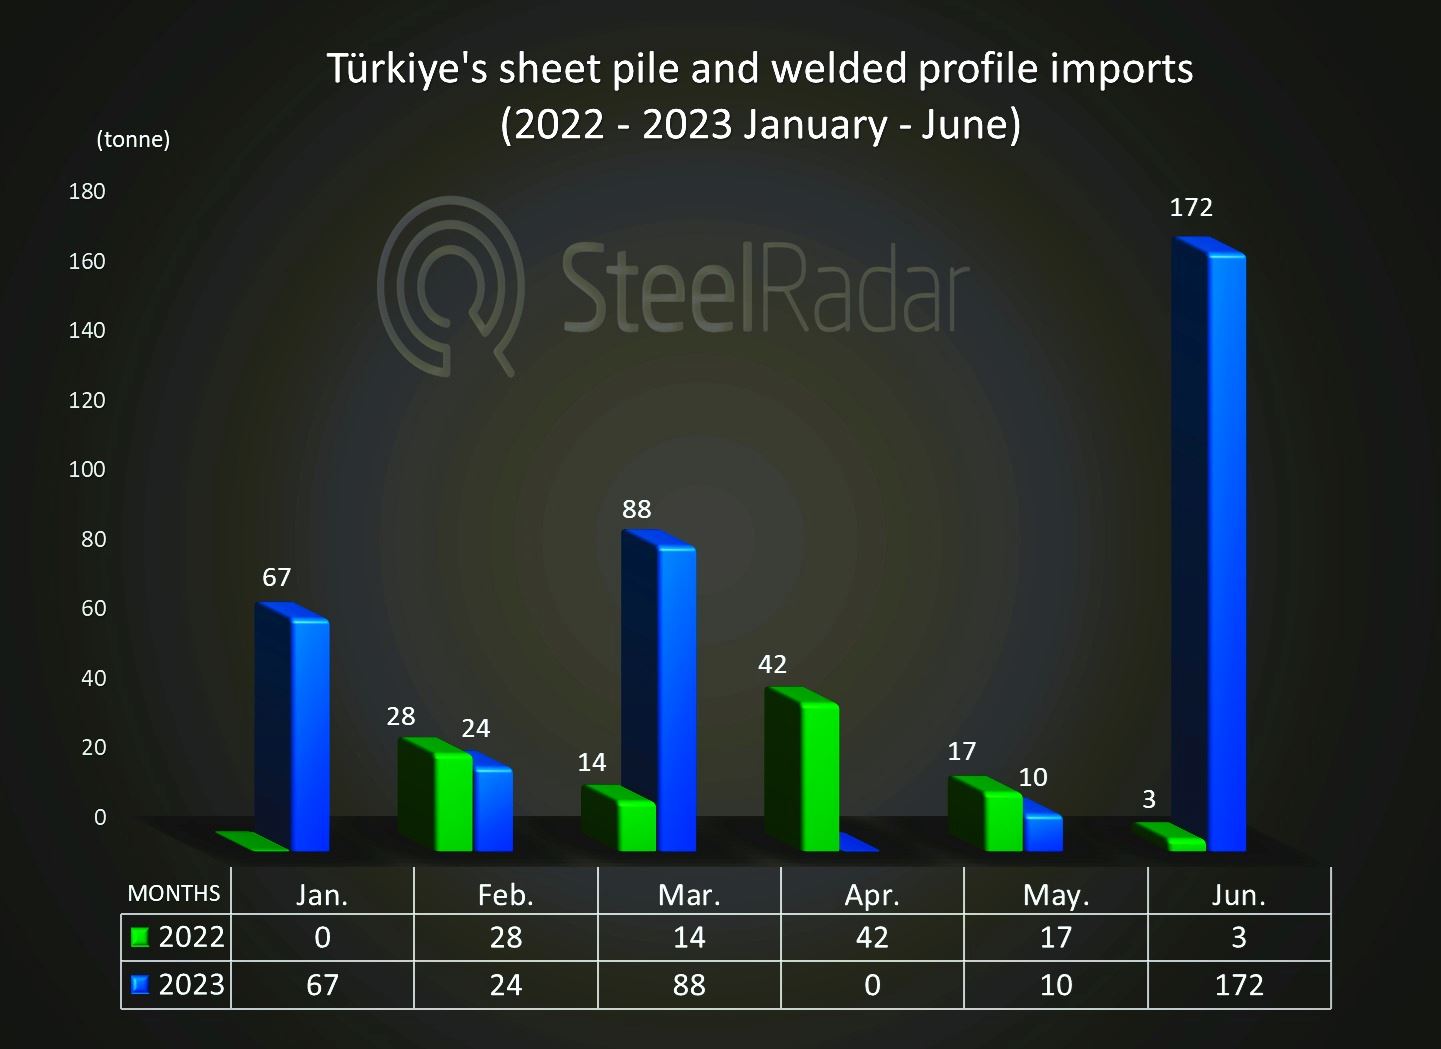 Turkiye's sheet pile and welded profile trade shows a recovery